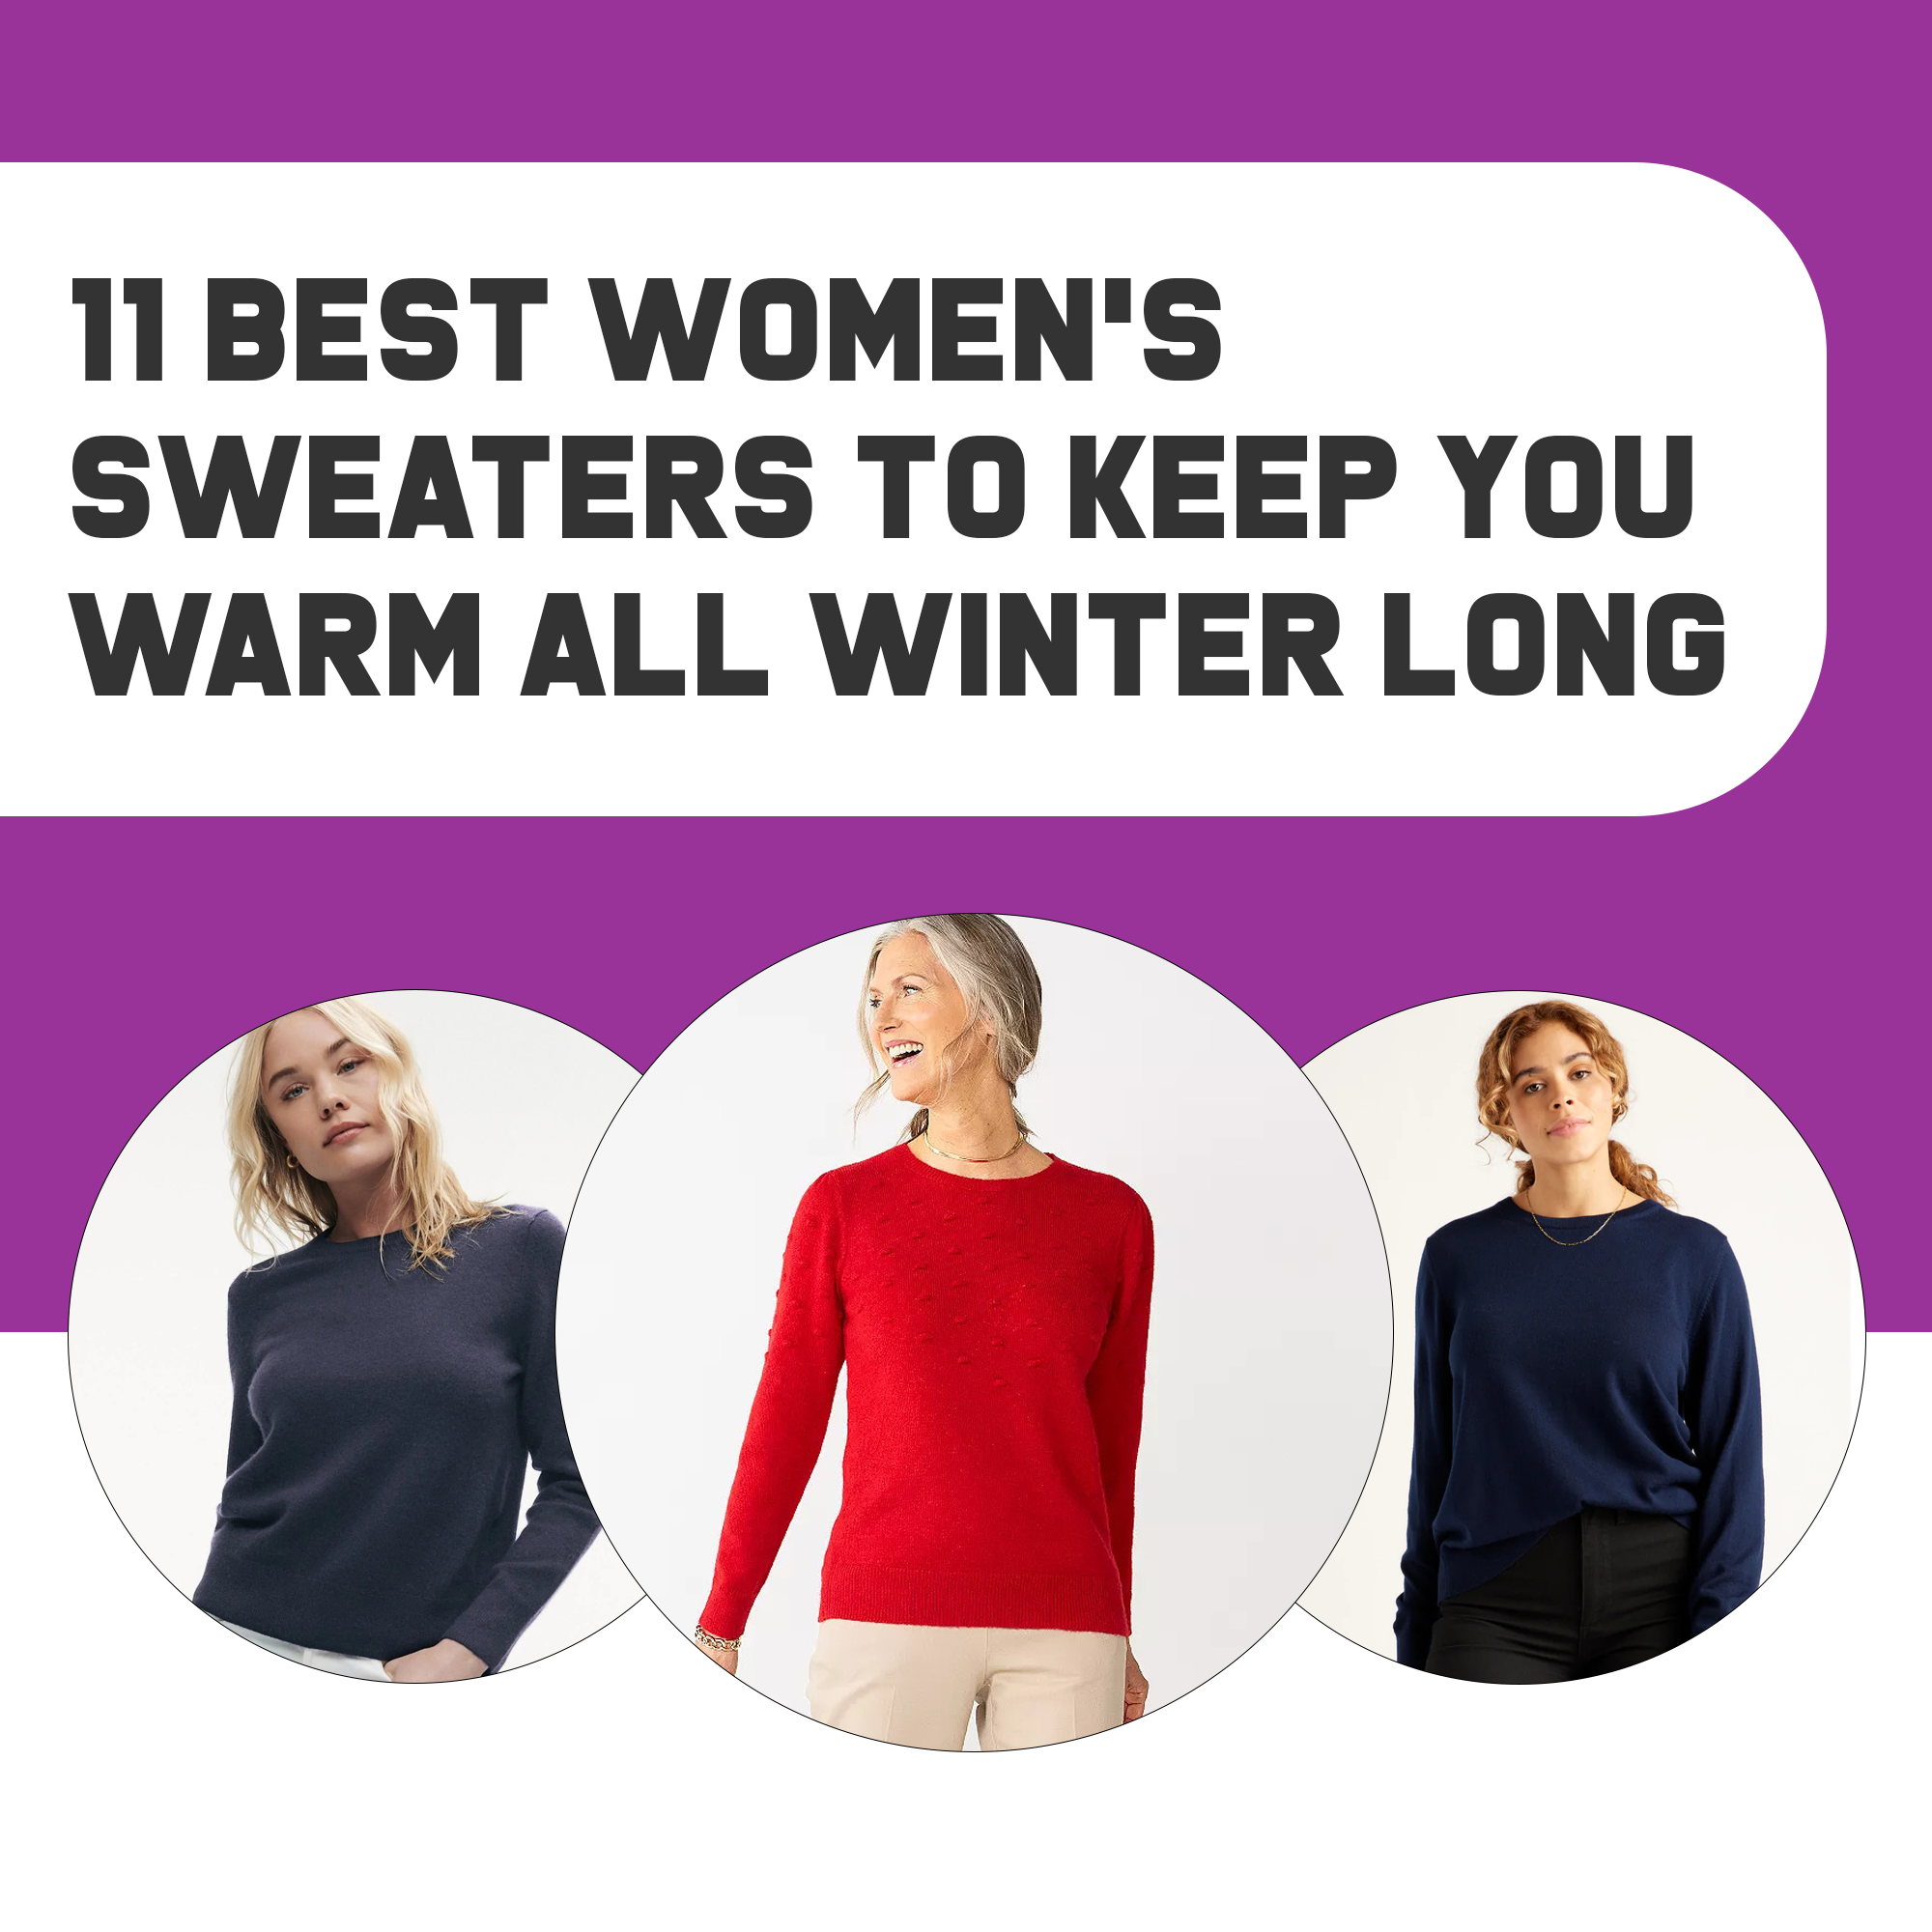 11 Best Women’s Sweaters To Keep You Warm All Winter Long